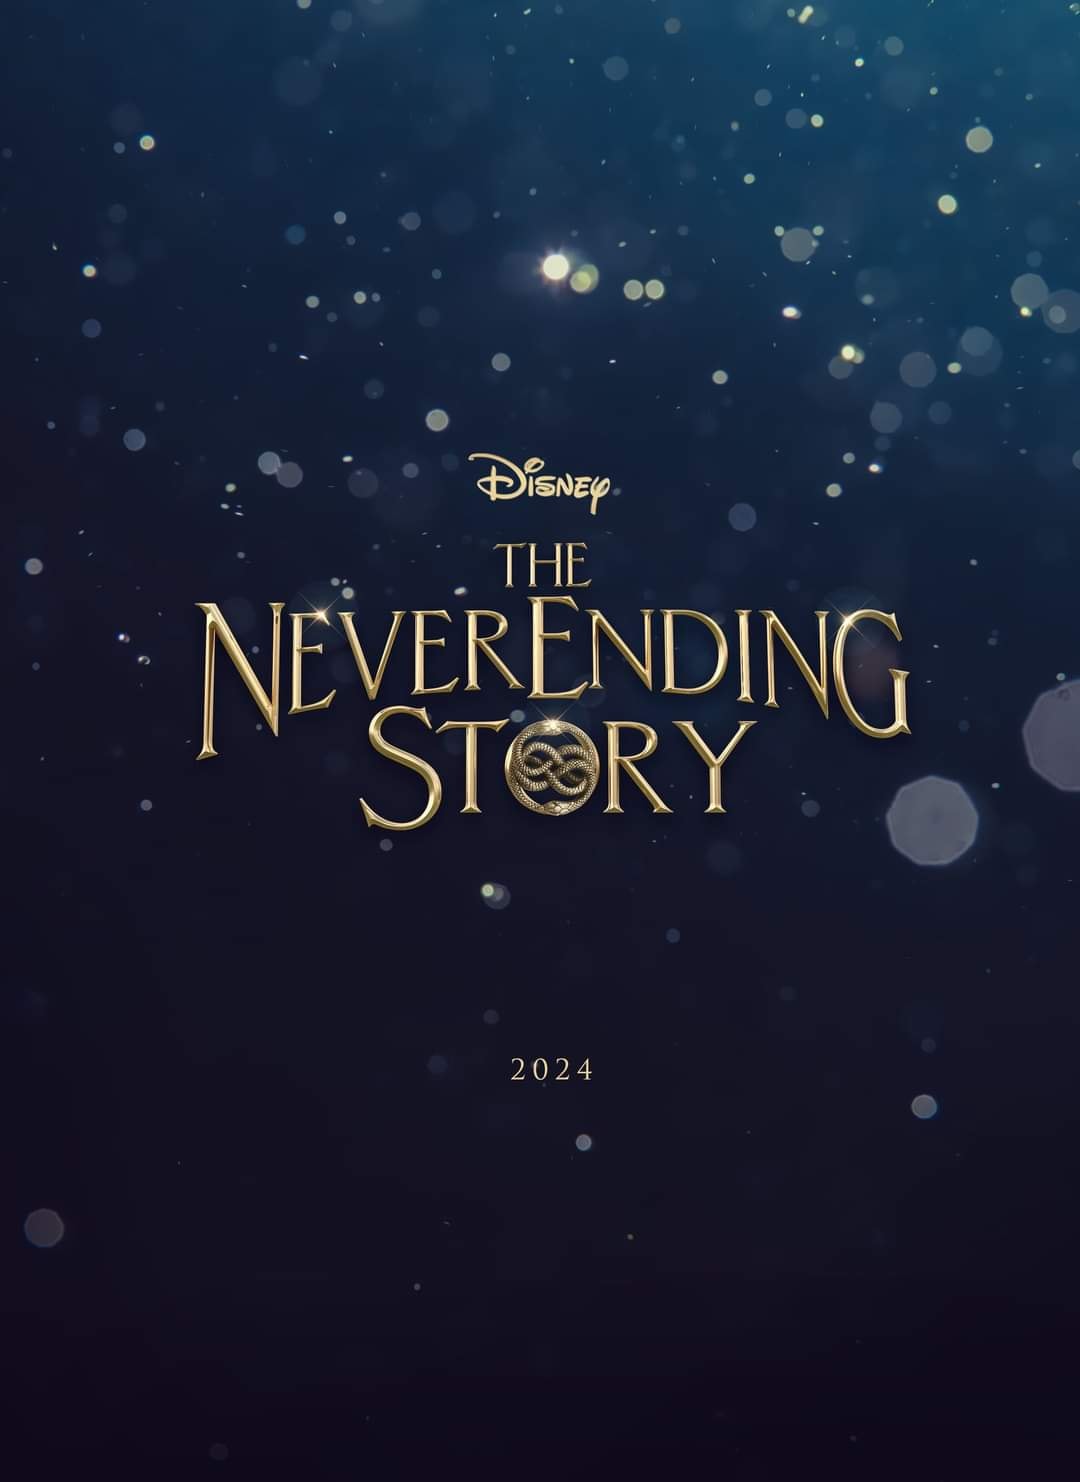 Did Disney Announce The NeverEnding Story Remake?